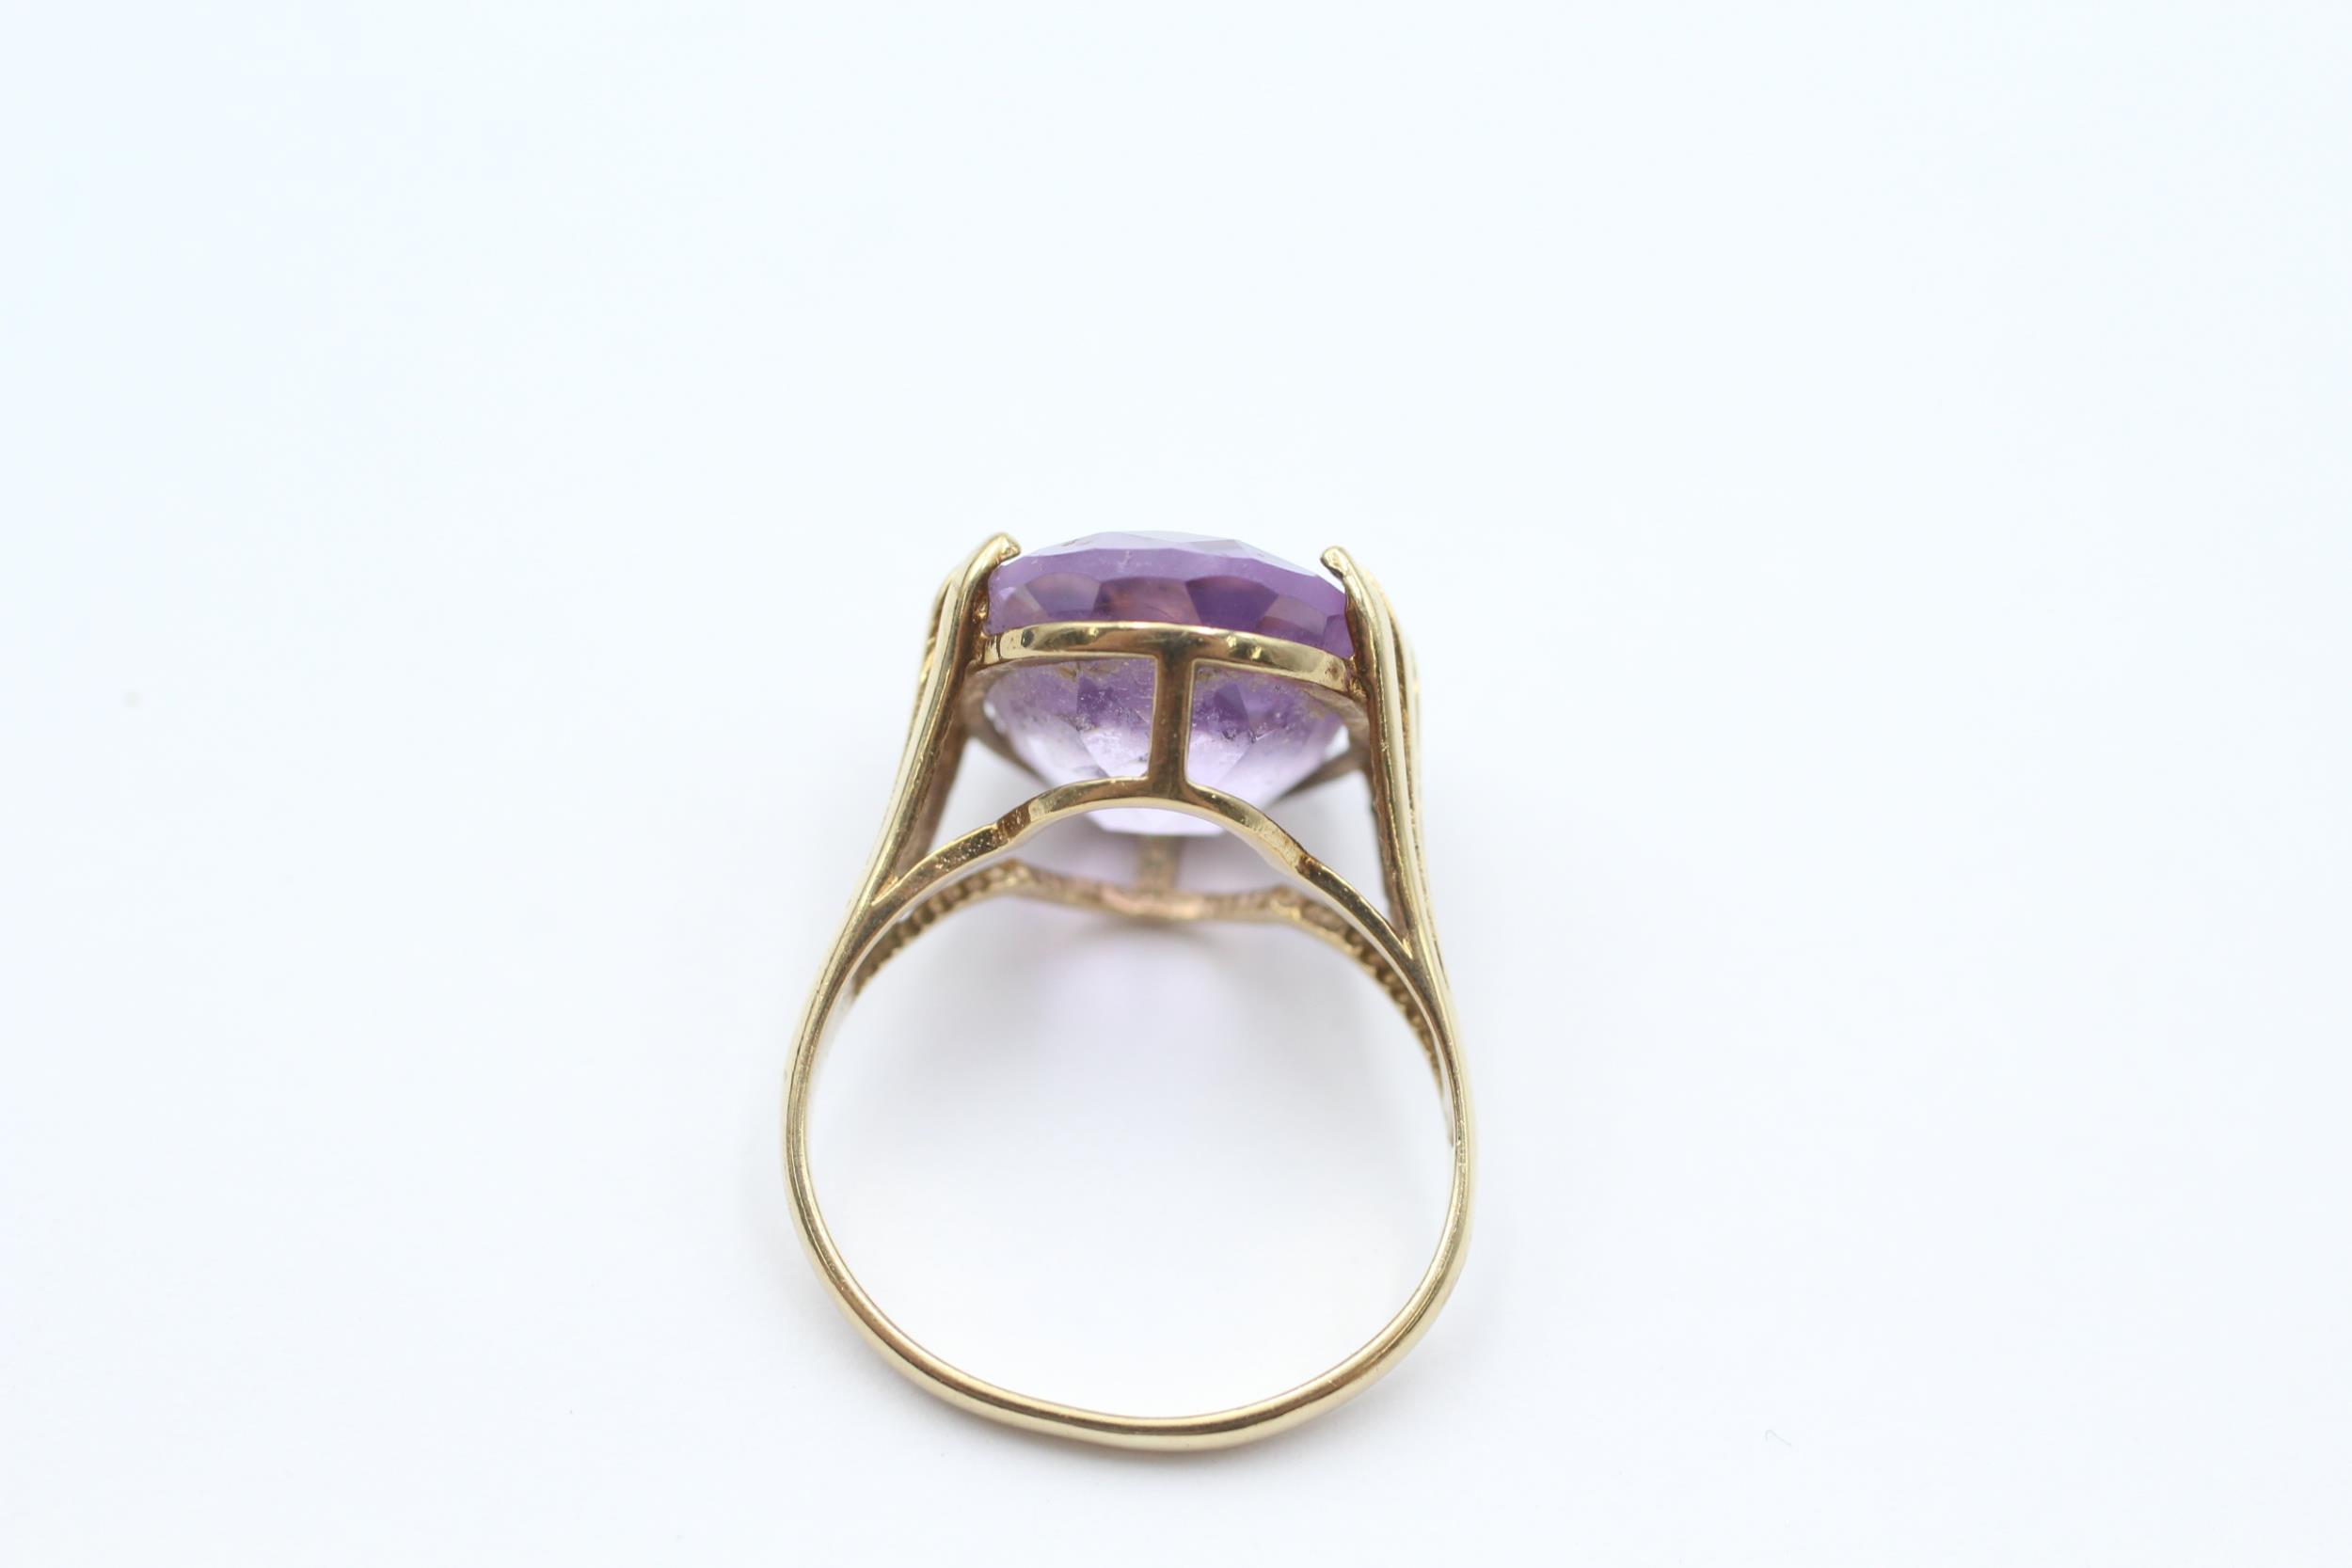 9ct gold oval amethyst single stone cocktail ring - MISHAPEN - AS SEEN Size L 1/2 - 4 g - Image 4 of 4